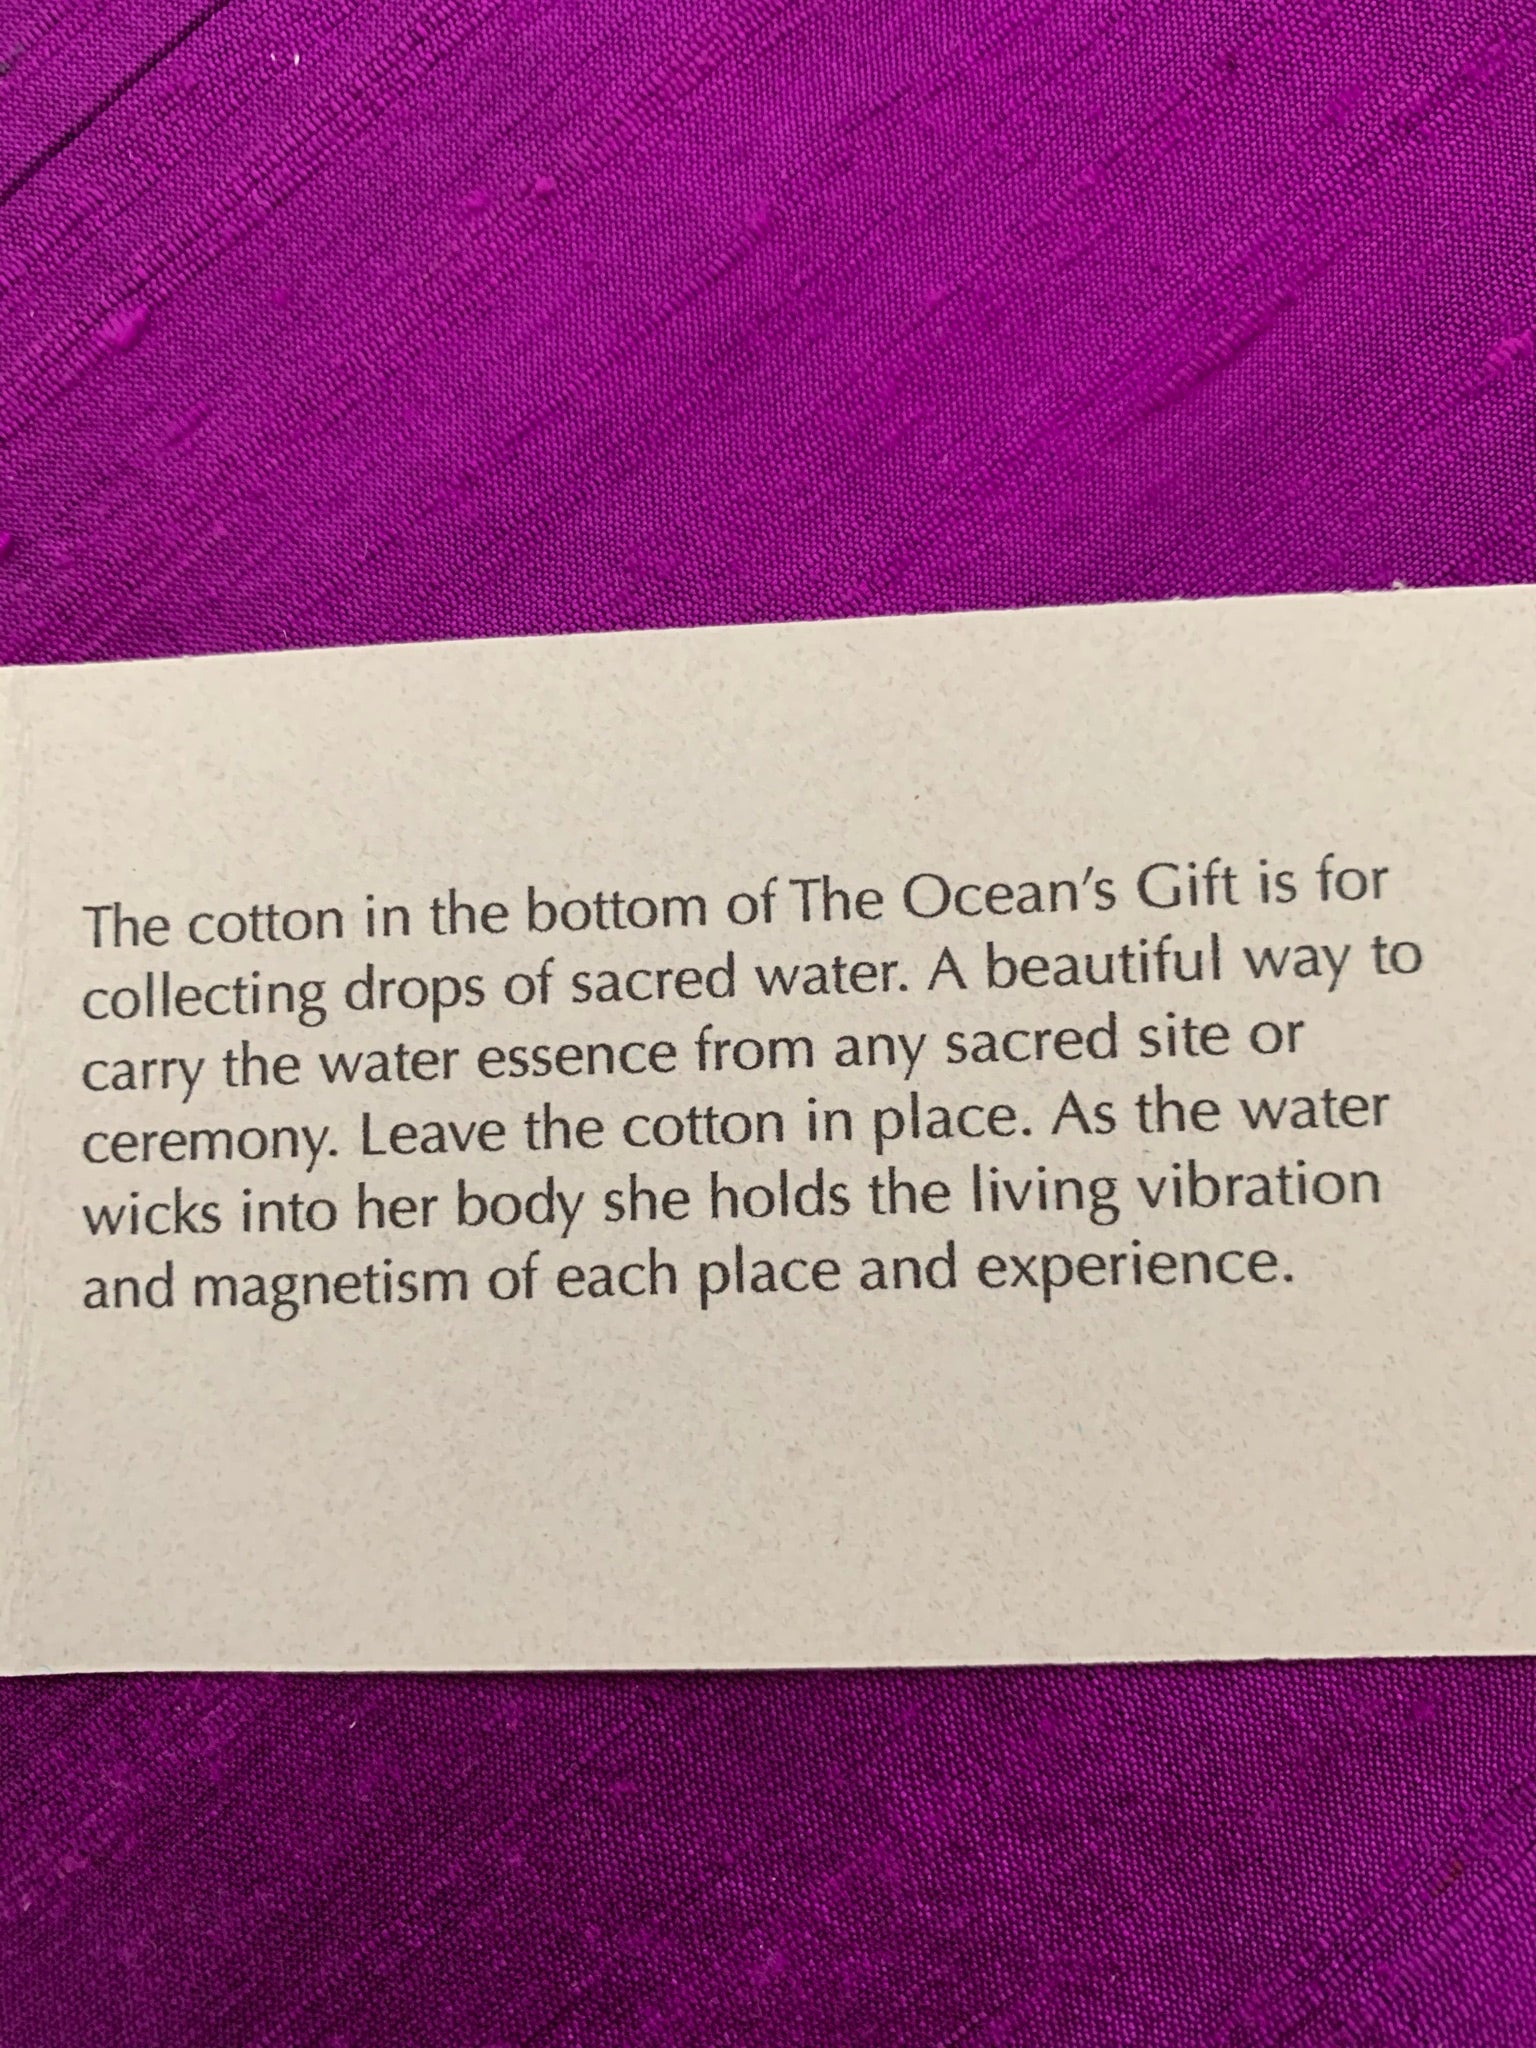 Photo of another card (the other half) of further information about the sculpture included with your purchase.